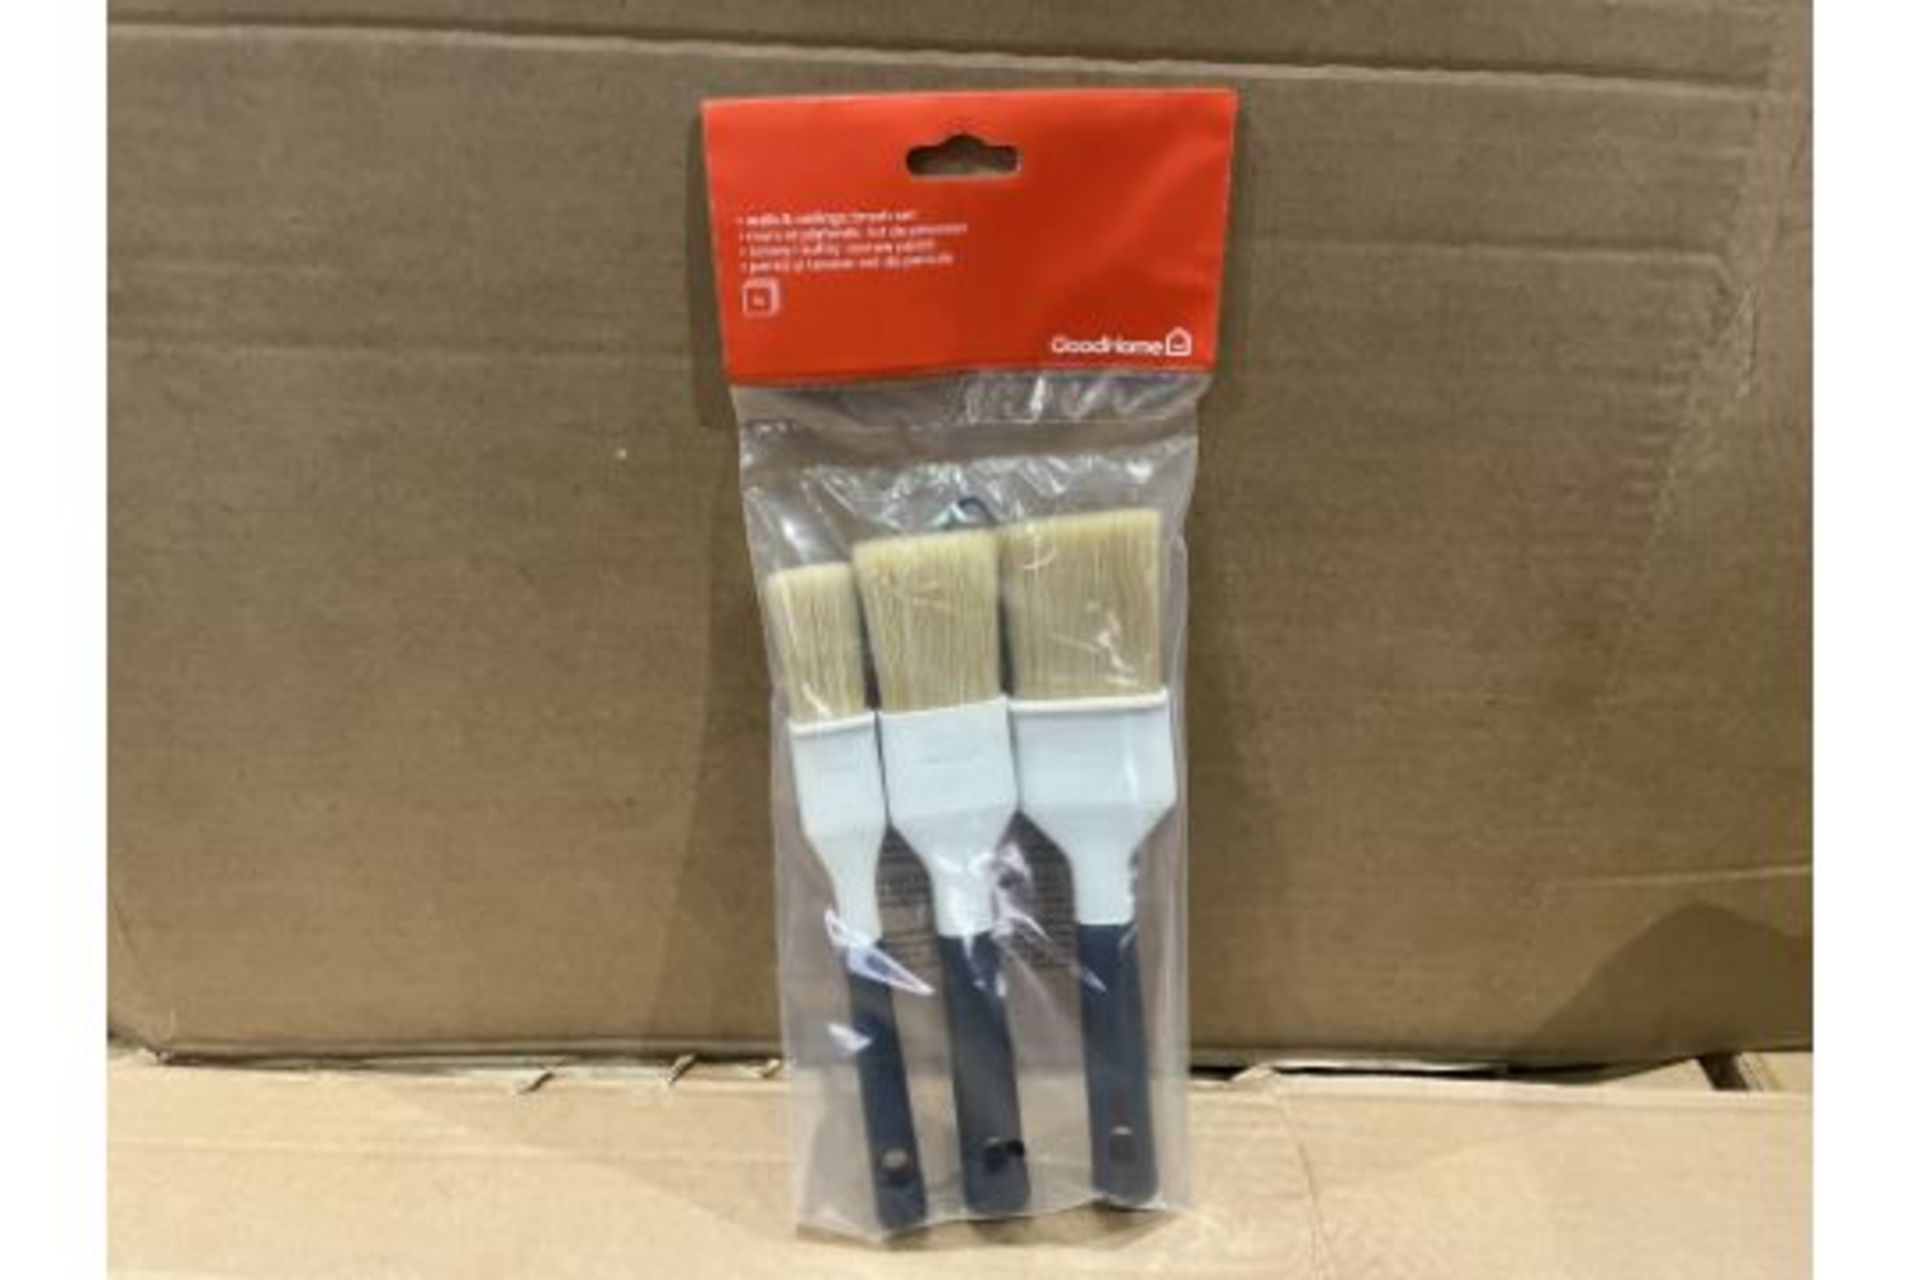 24 X BRAND NEW SETS OF 3 ASSORTED FINE FILAMENT TIP PAINT BRUSHES R16-7